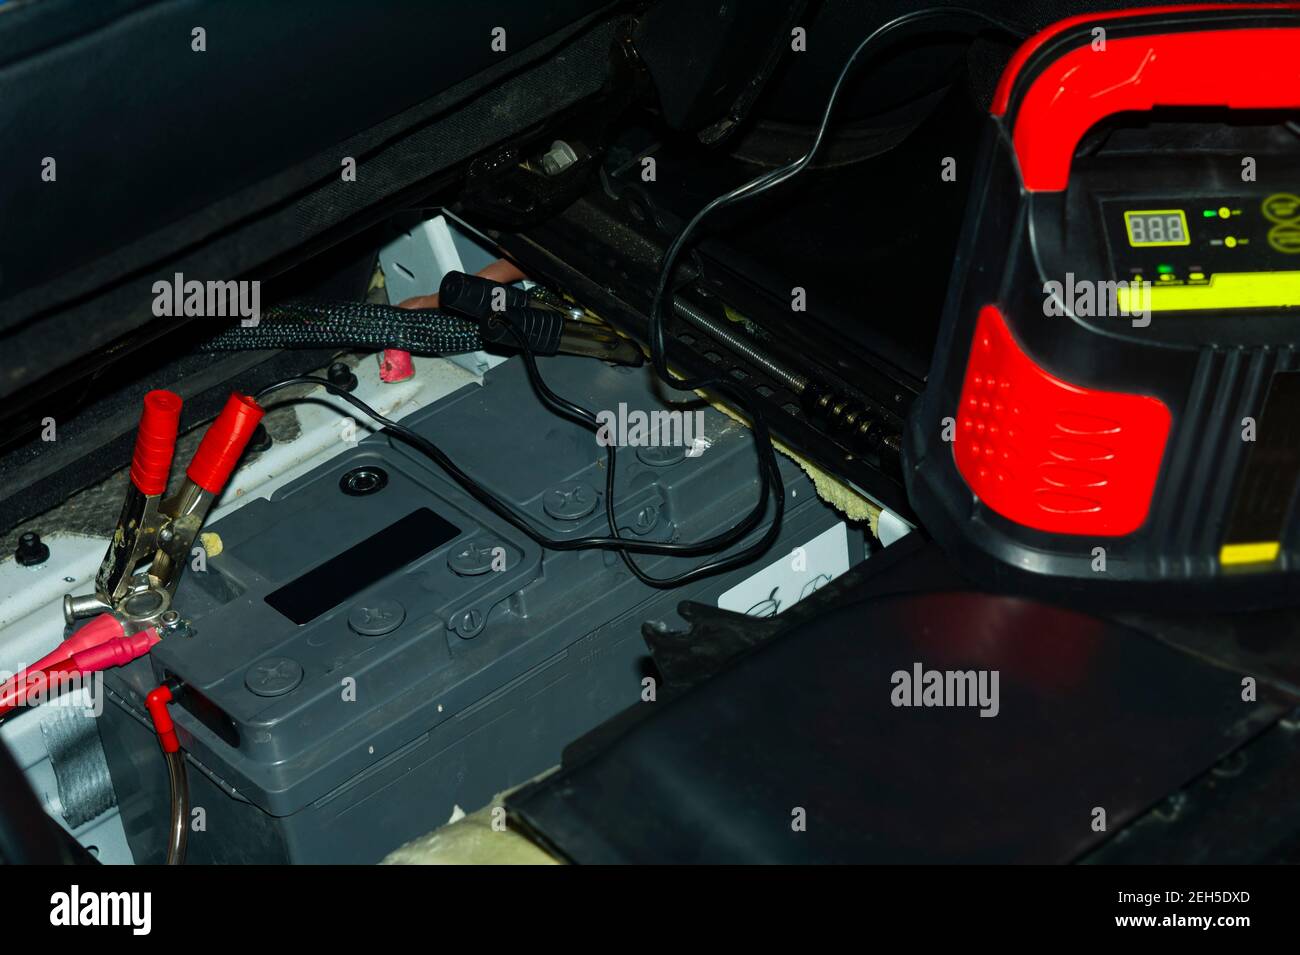 Page 8 - Inside Car Battery High Resolution Stock Photography and Images -  Alamy